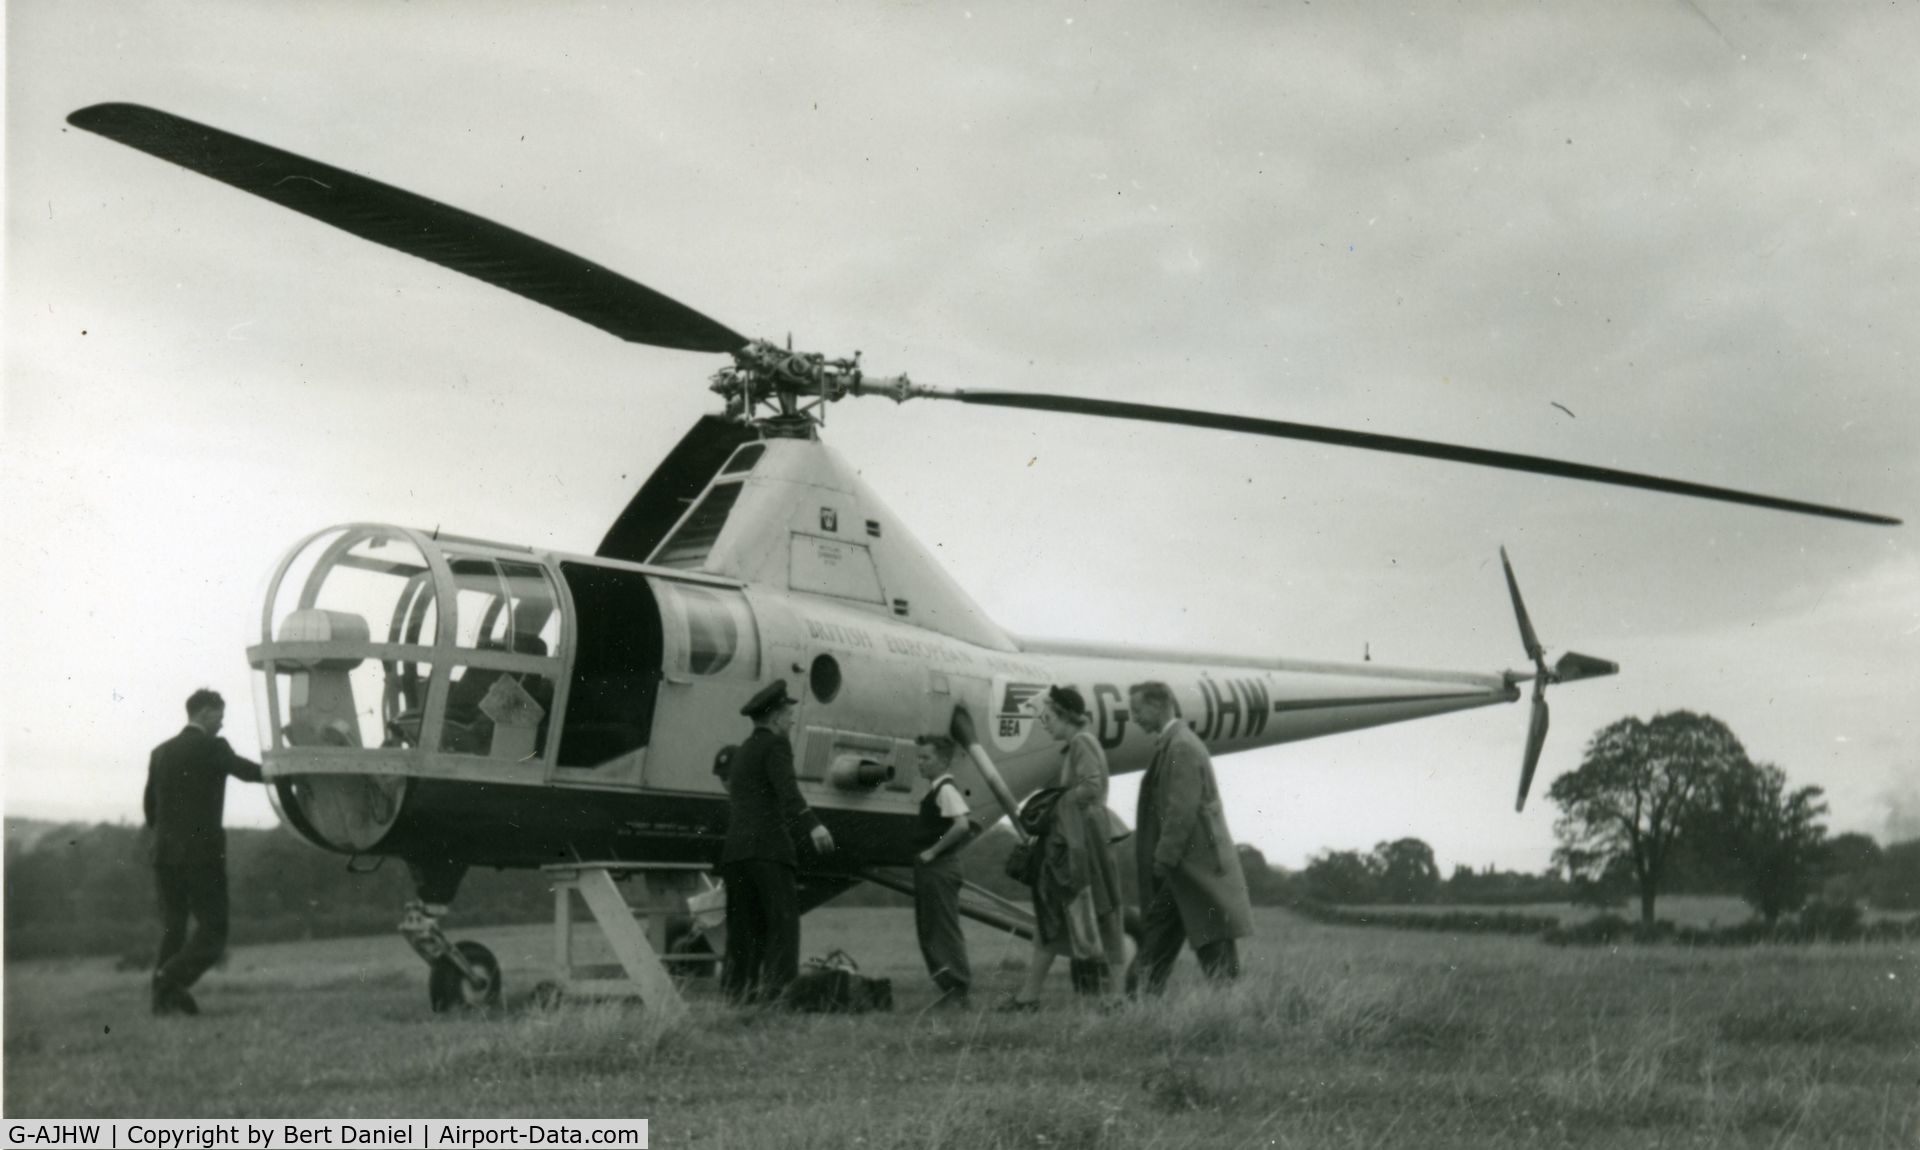 G-AJHW, Sikorsky S-51 C/N 5117, Complete guess at year taken from context in album - taken by my father